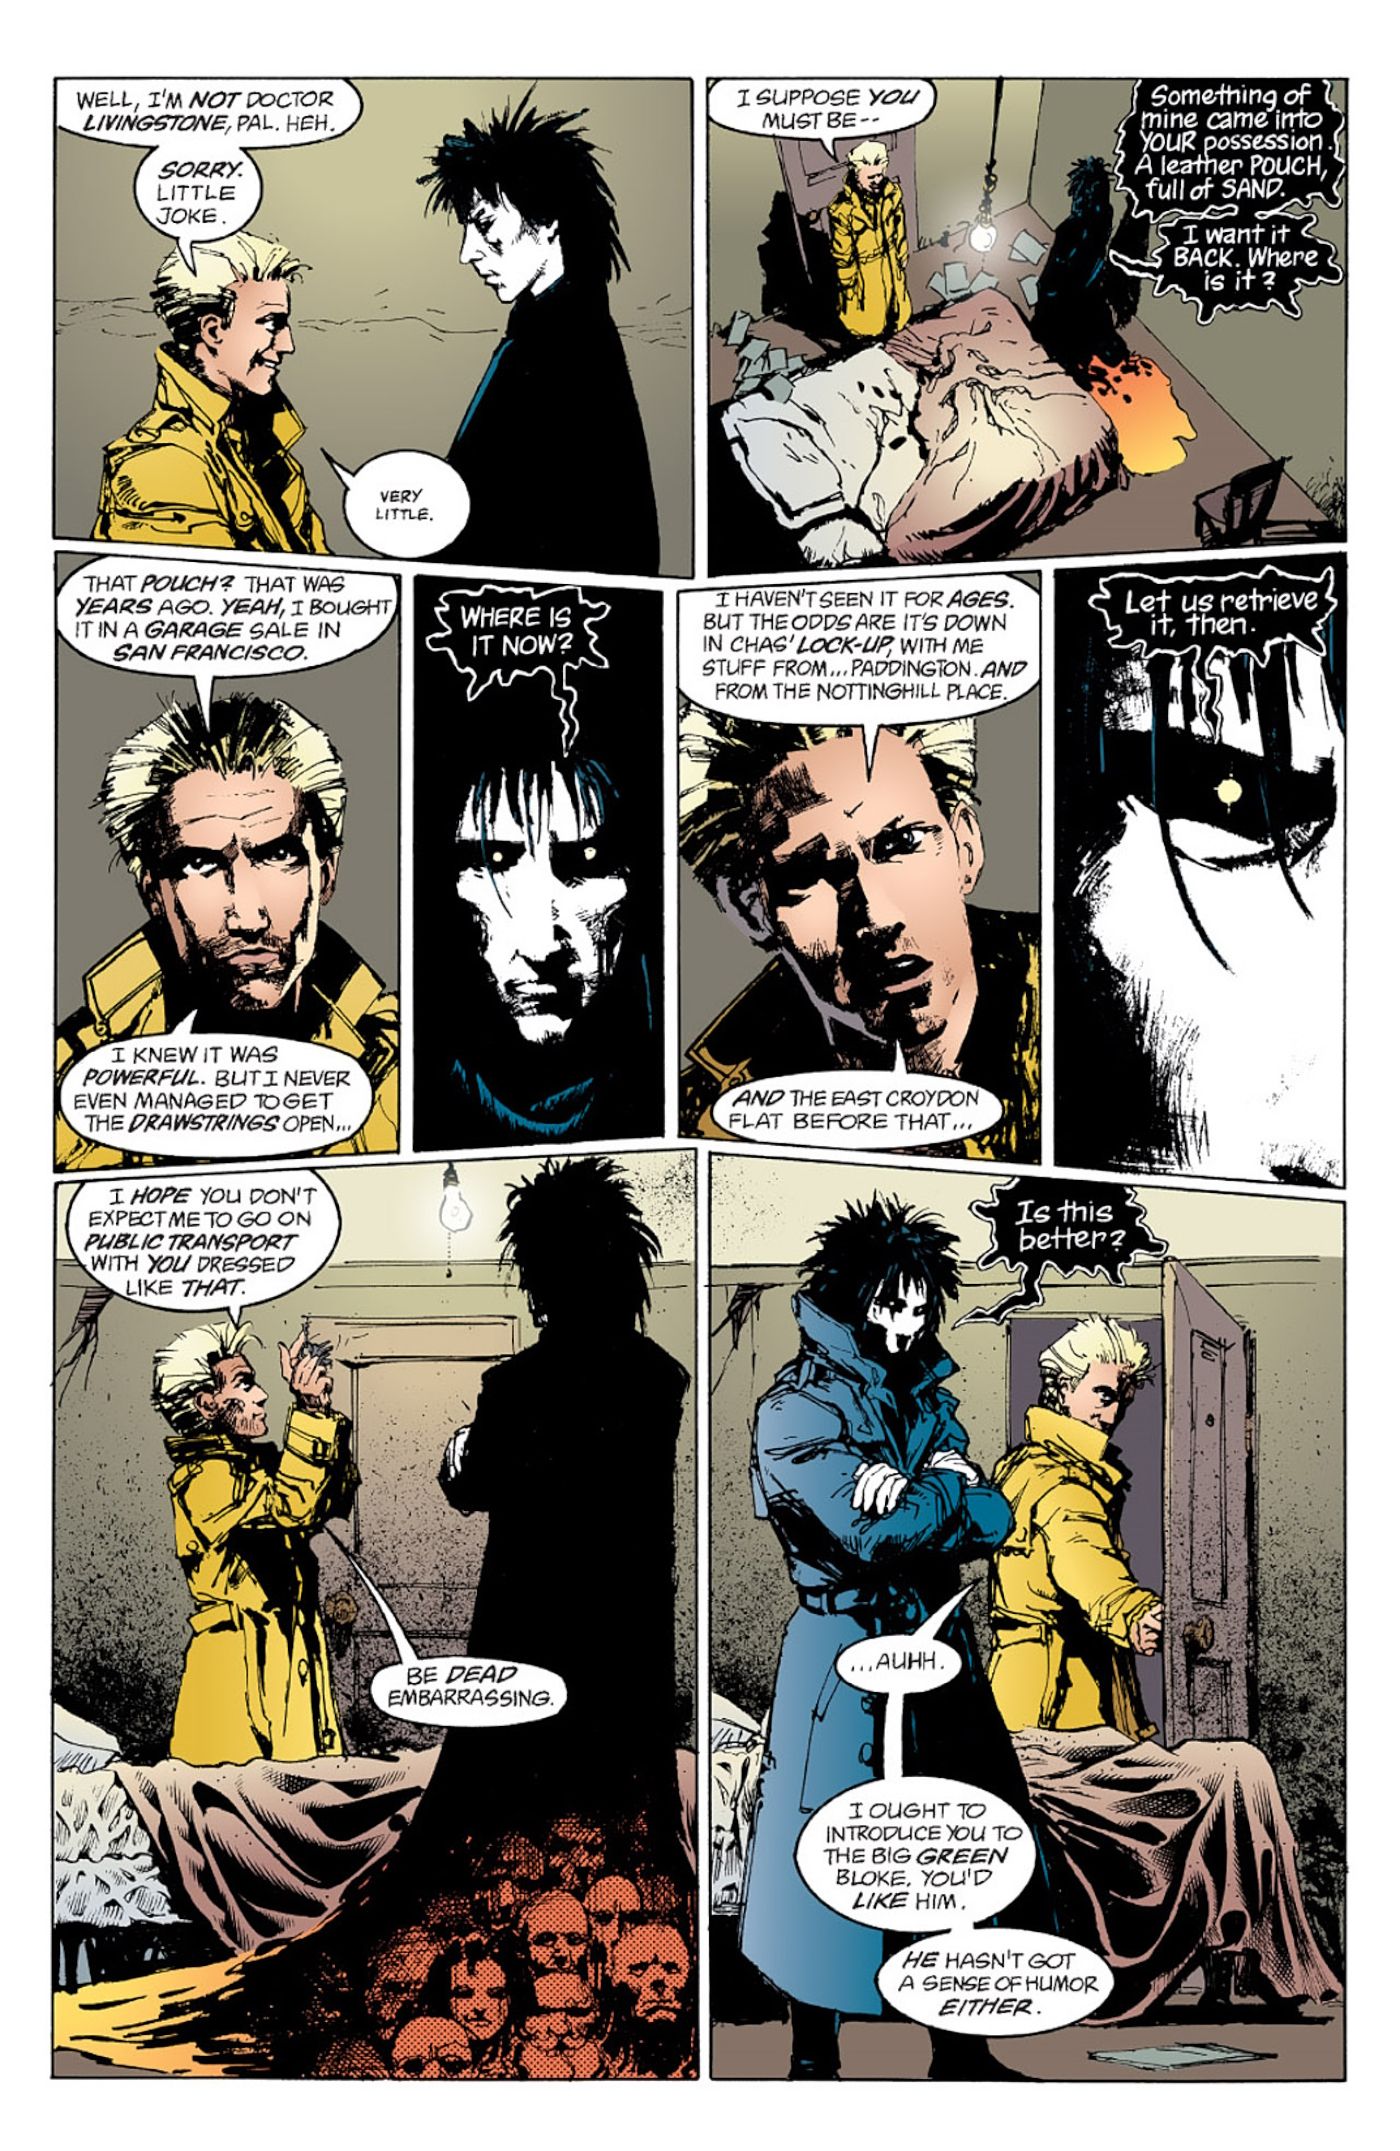 panels from Sandman #3, Constantine tells Dream he never opened the pouch of sand. (He did.)